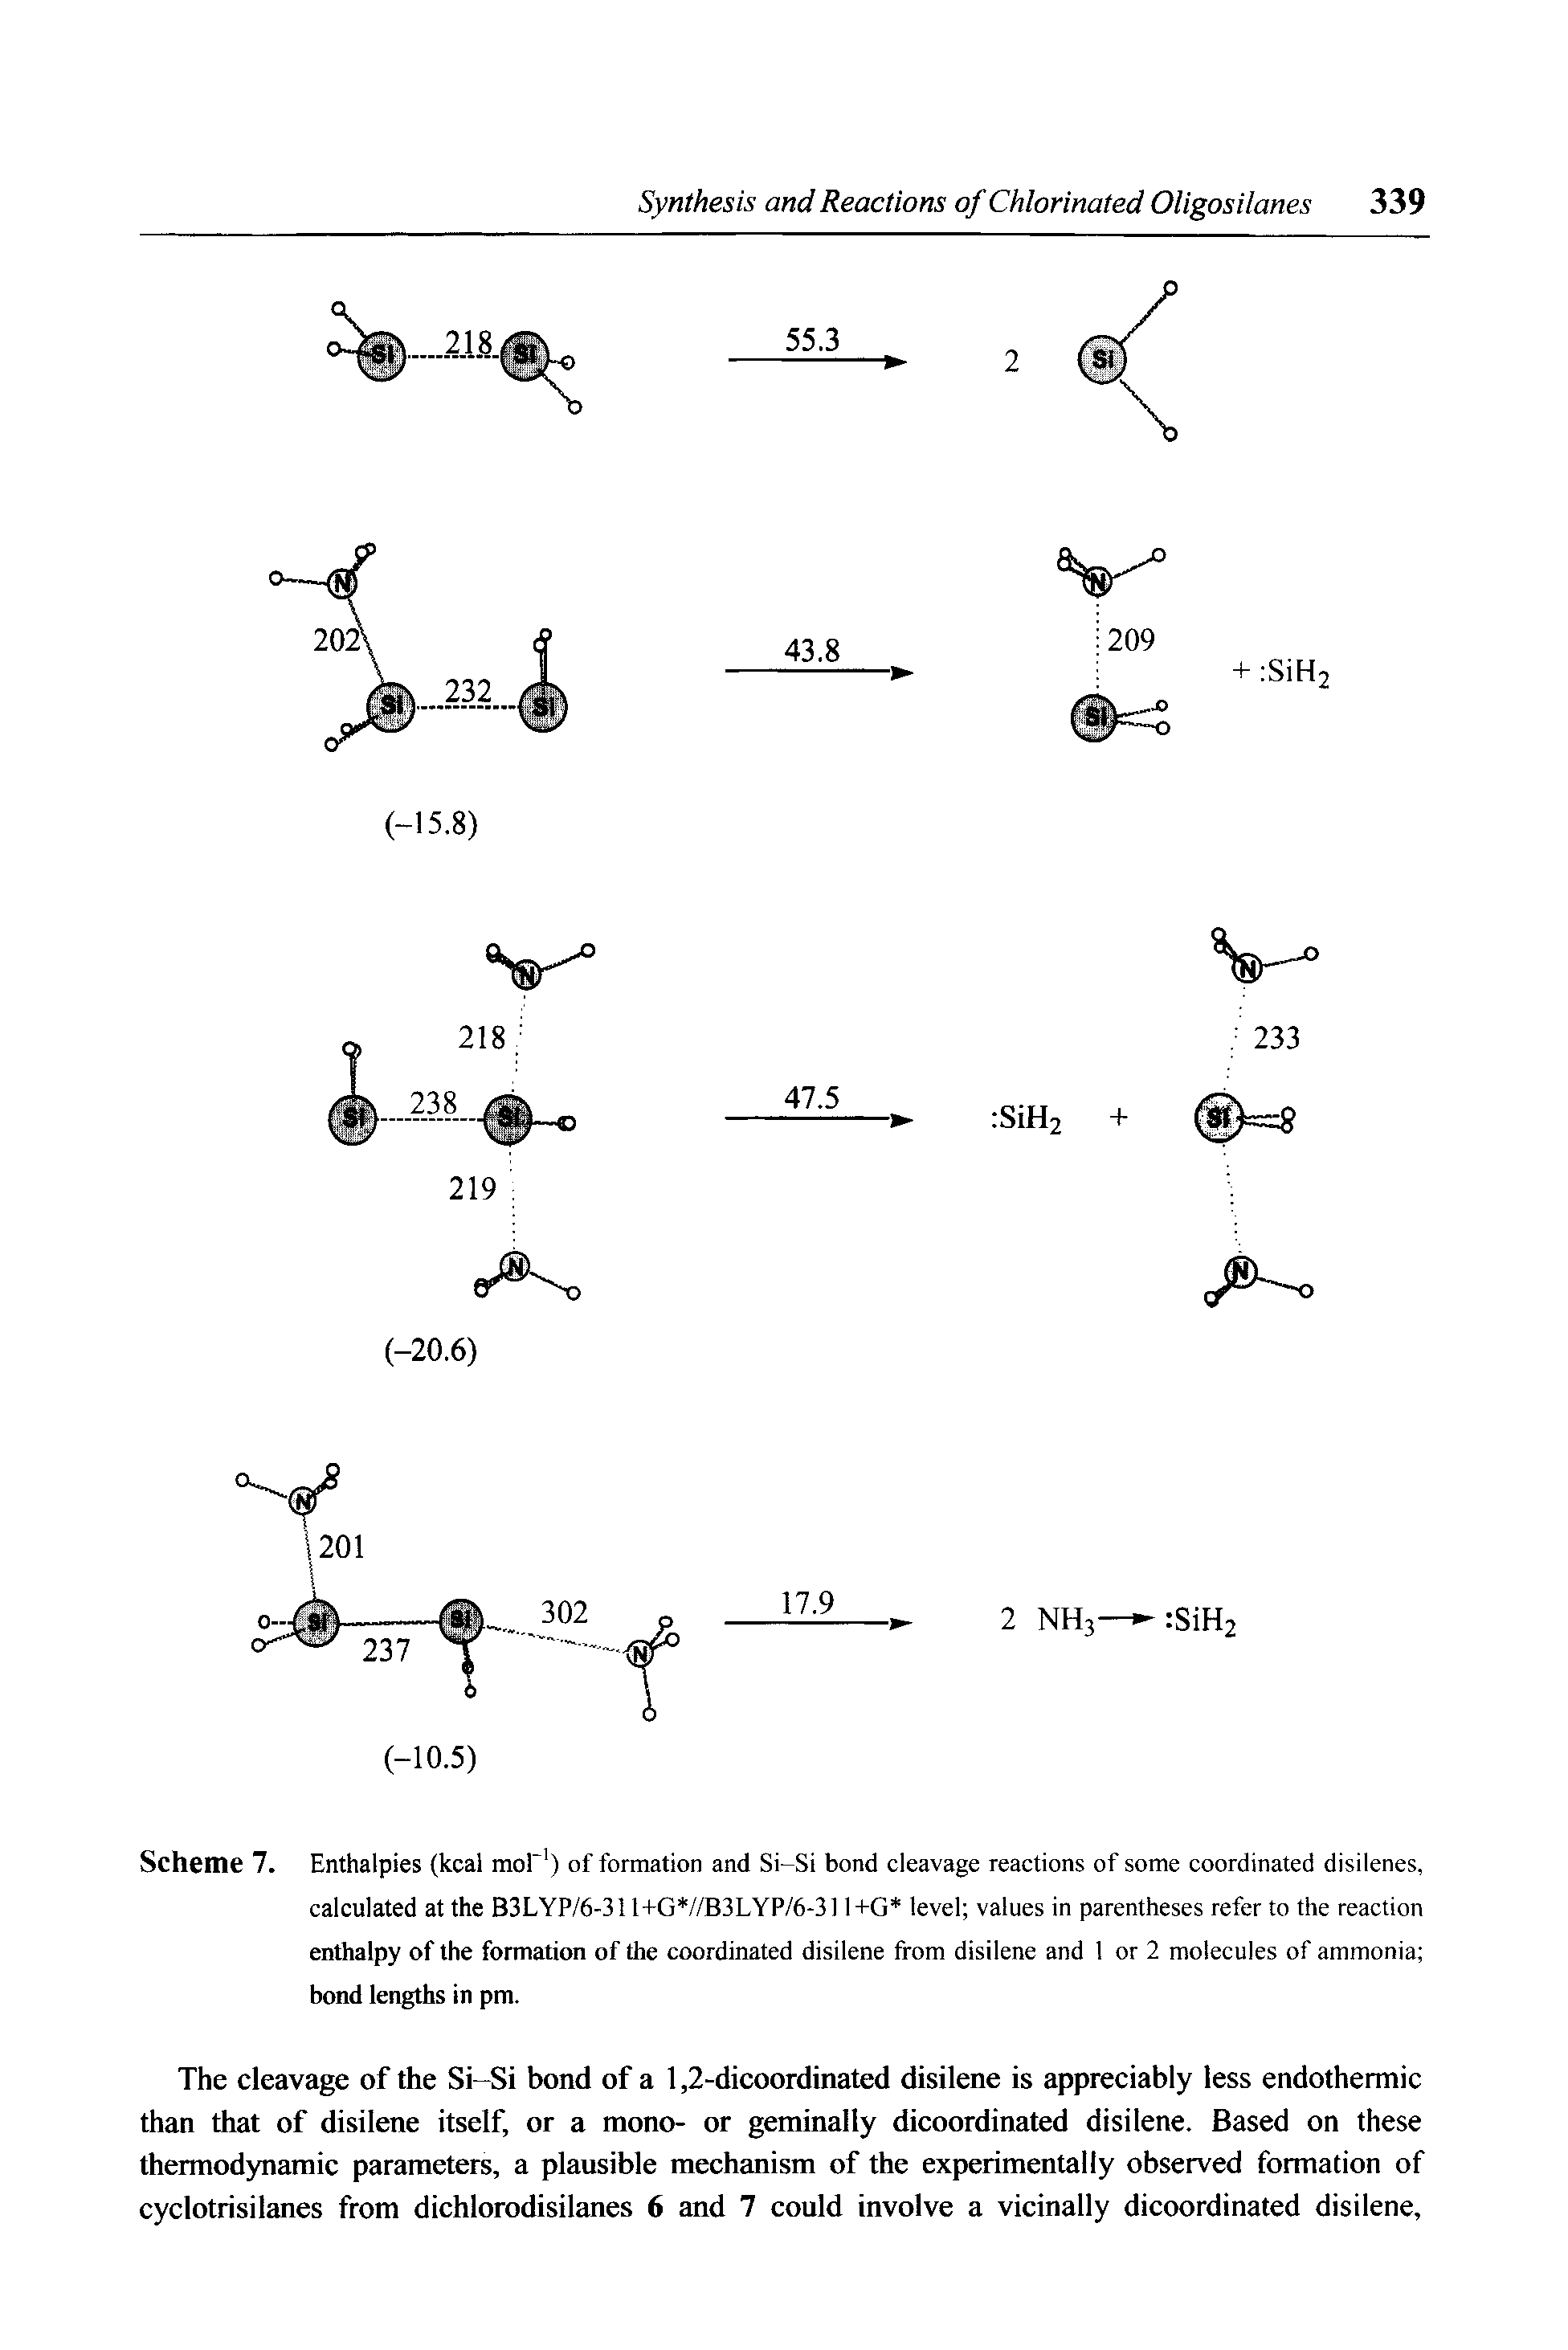 Scheme 7. Enthalpies (kcal mor ) of formation and Si-Si bond cleavage reactions of some coordinated disilenes, calculated at the B3LYP/6-31 l+G //B3LYP/6-31 l+G level values in parentheses refer to the reaction enthalpy of the formation of the coordinated disilene from disilene and 1 or 2 molecules of ammonia bond lengths in pm.